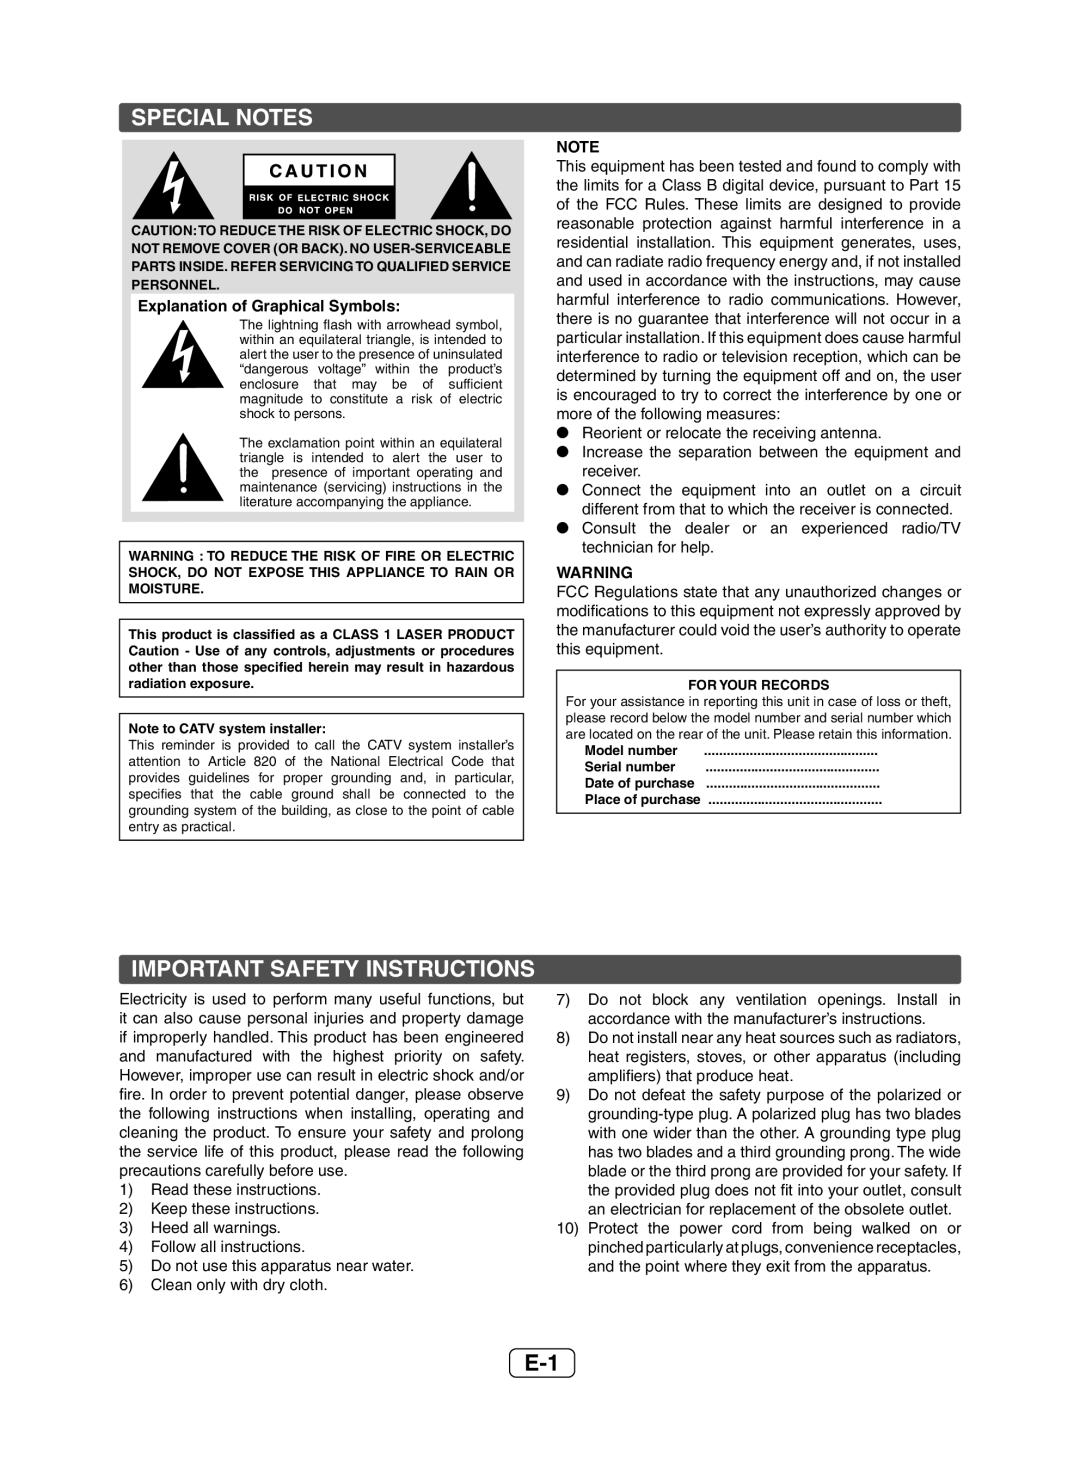 Sharp XLDH259P Special Notes, Important Safety Instructions, Note to CATV system installer, For Your Records 